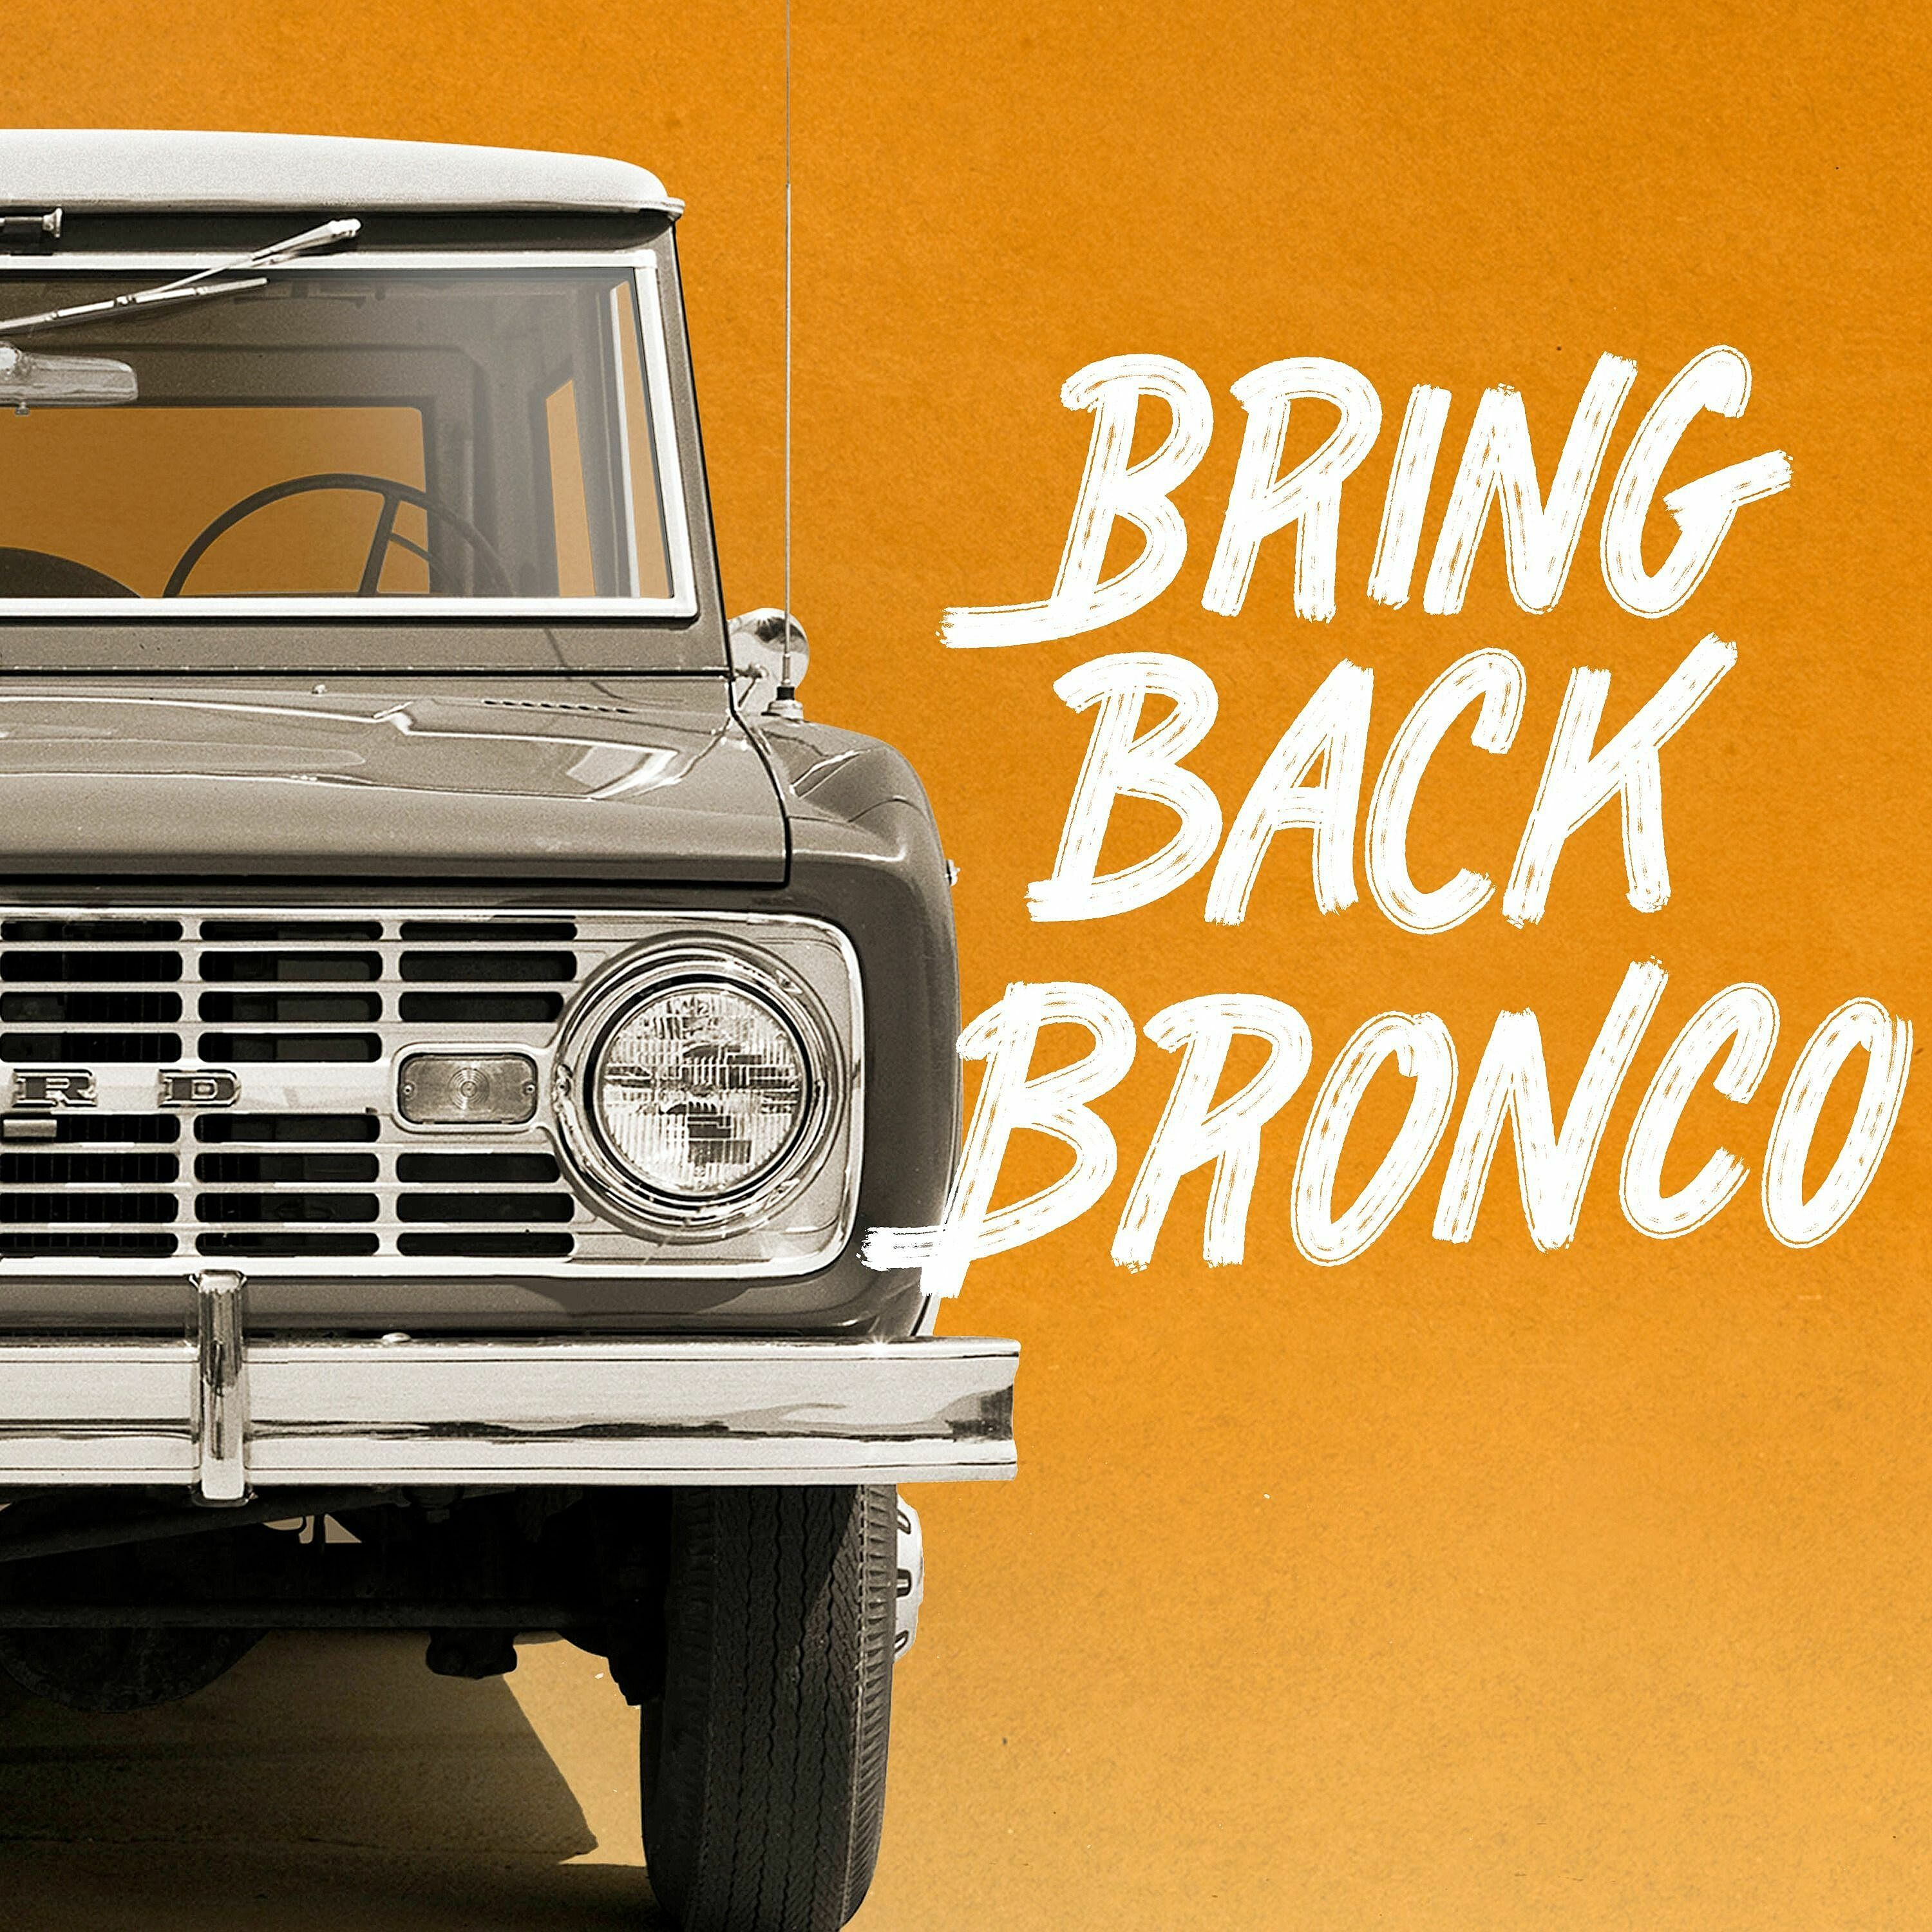 End of the Road—1994 to 1996 (S1E4 of Bring Back Bronco: The Untold Story)